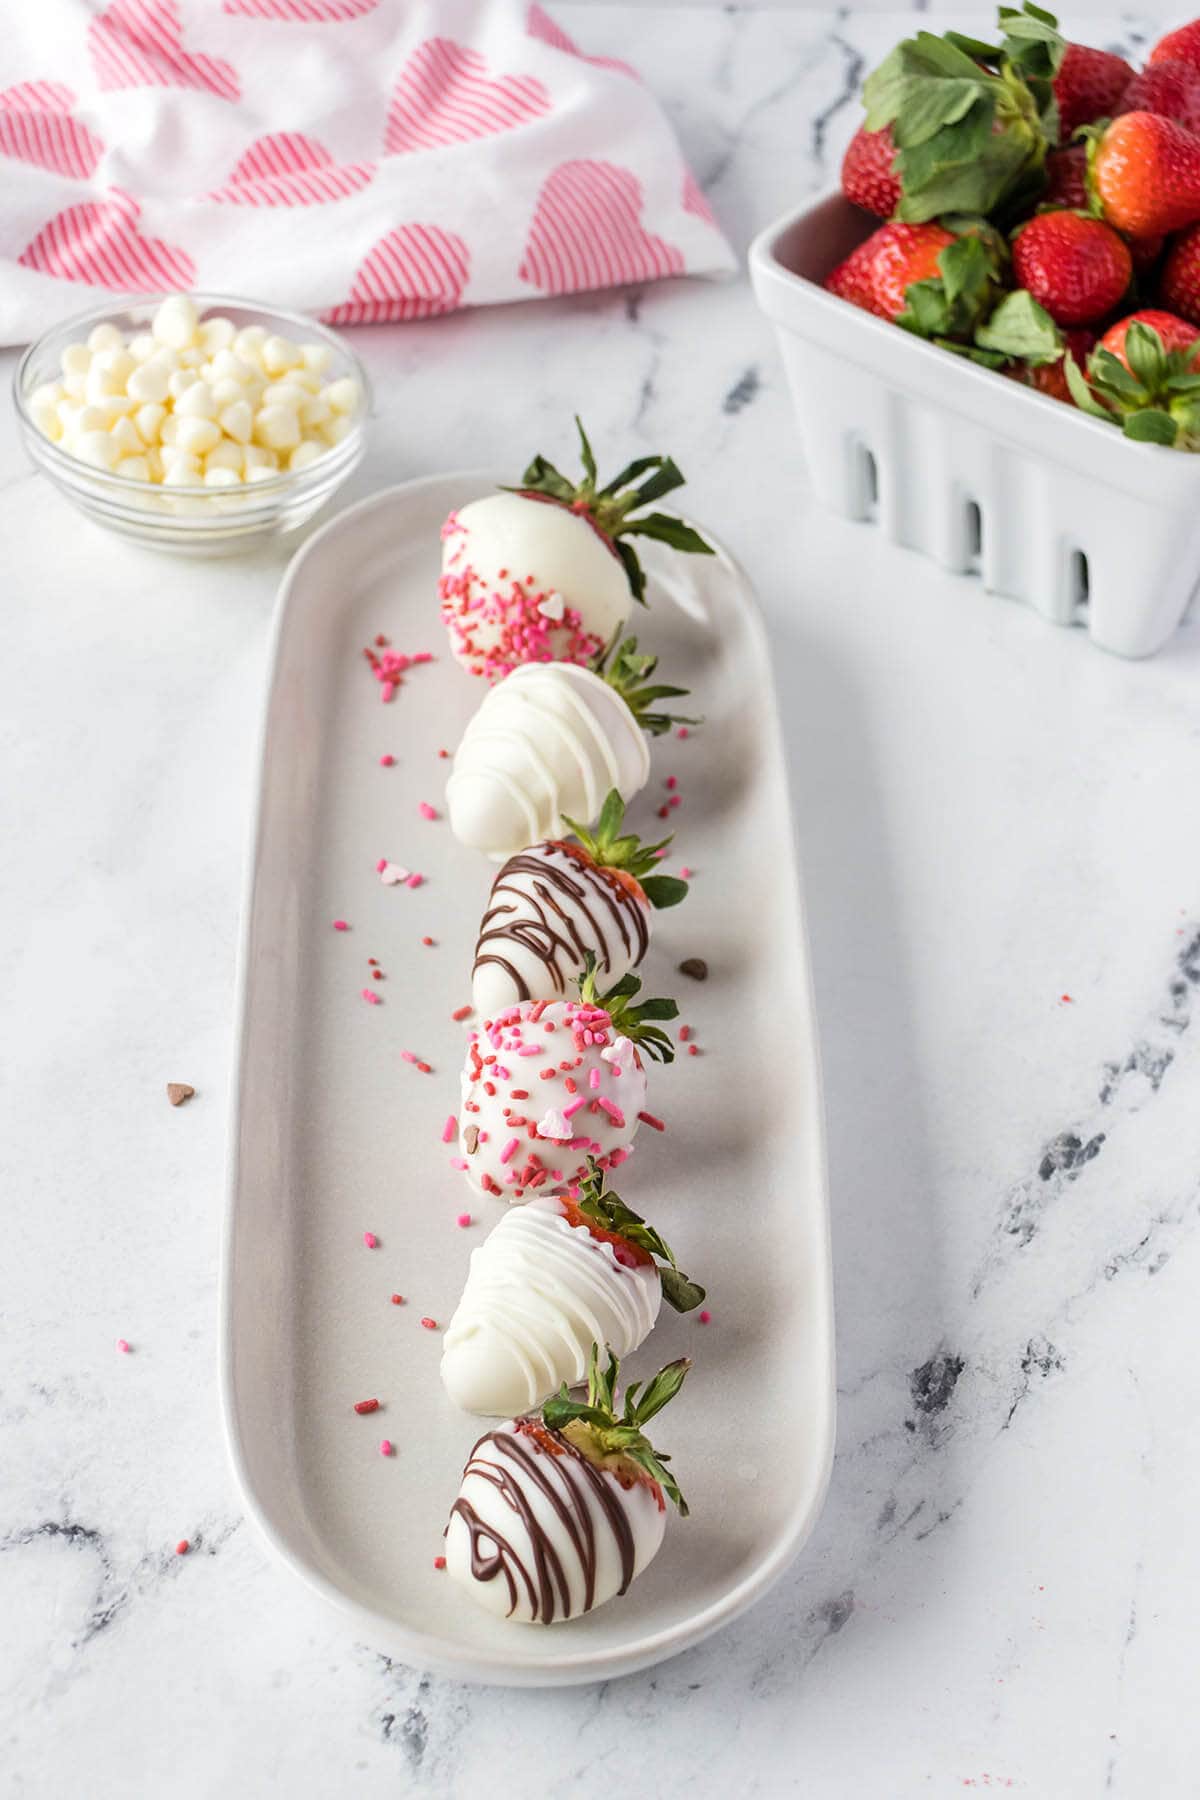 Chocolate-covered strawberries on platter.